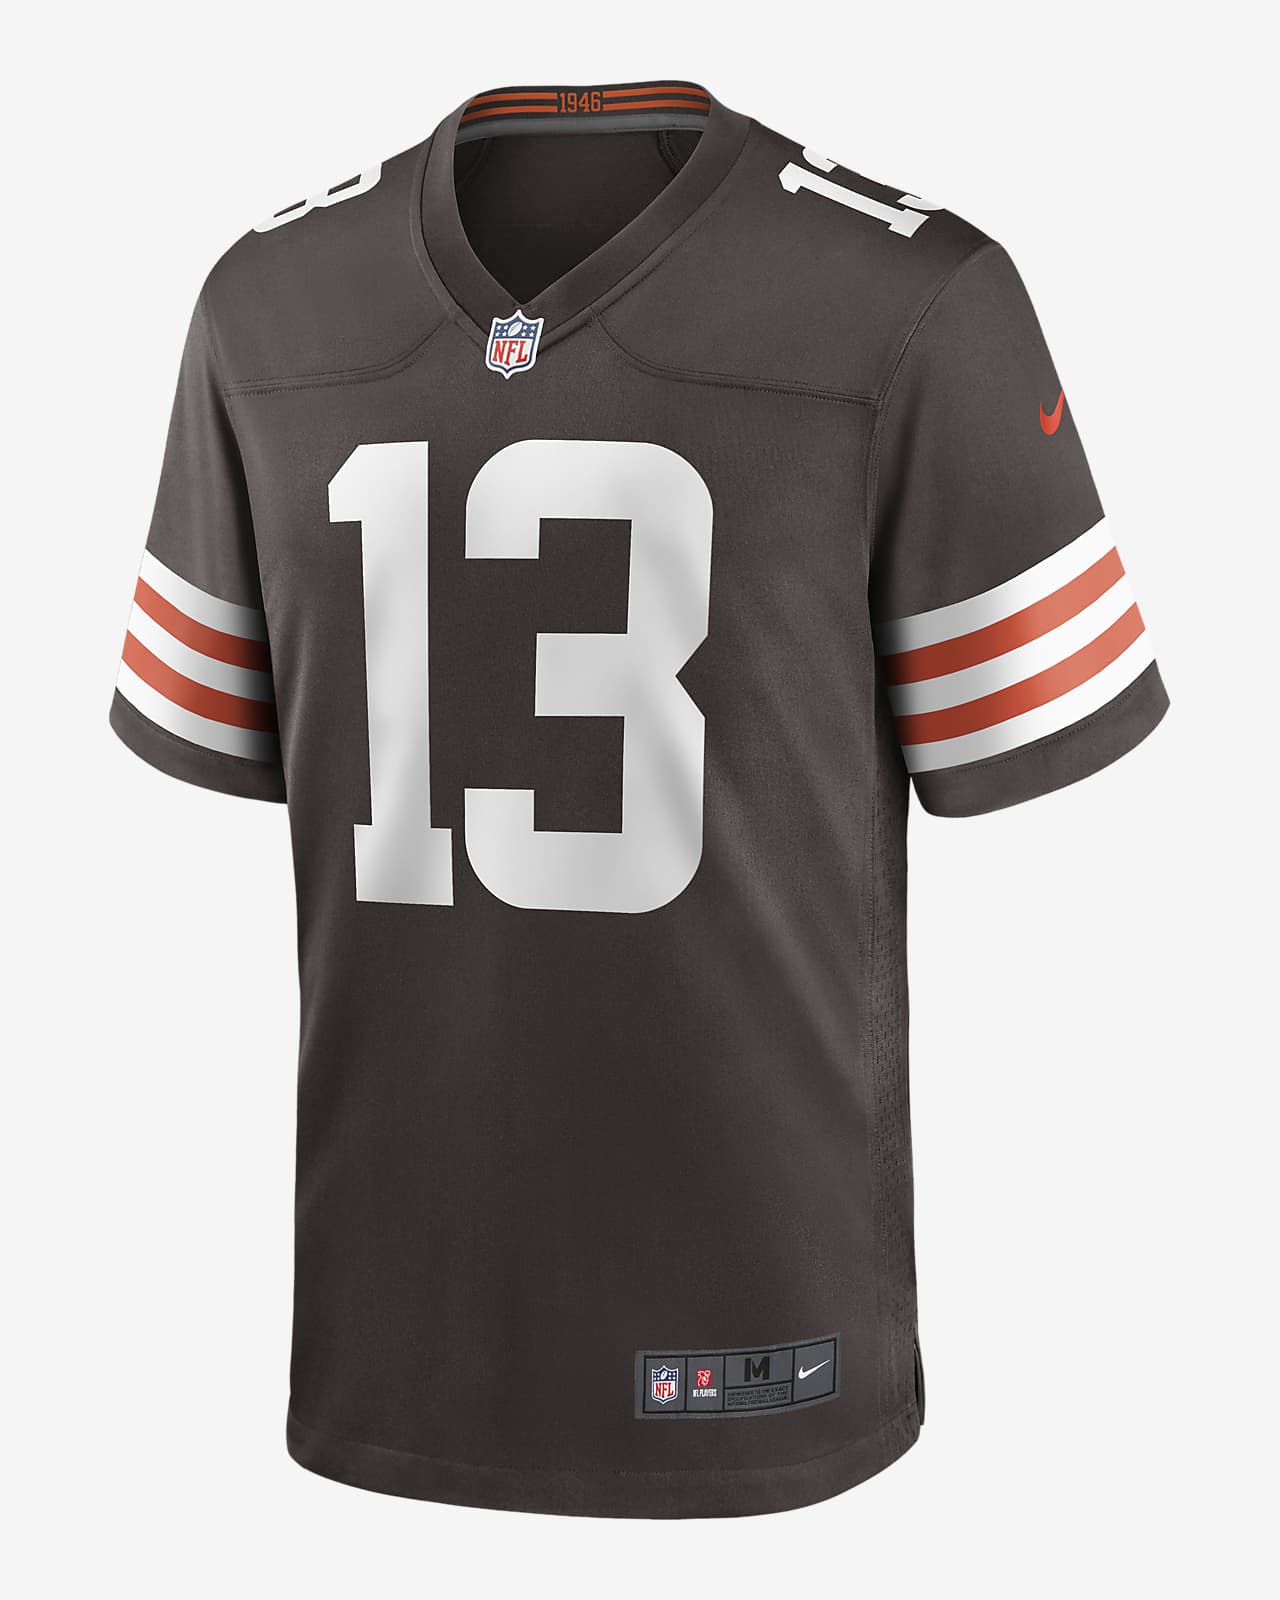 browns jersey release